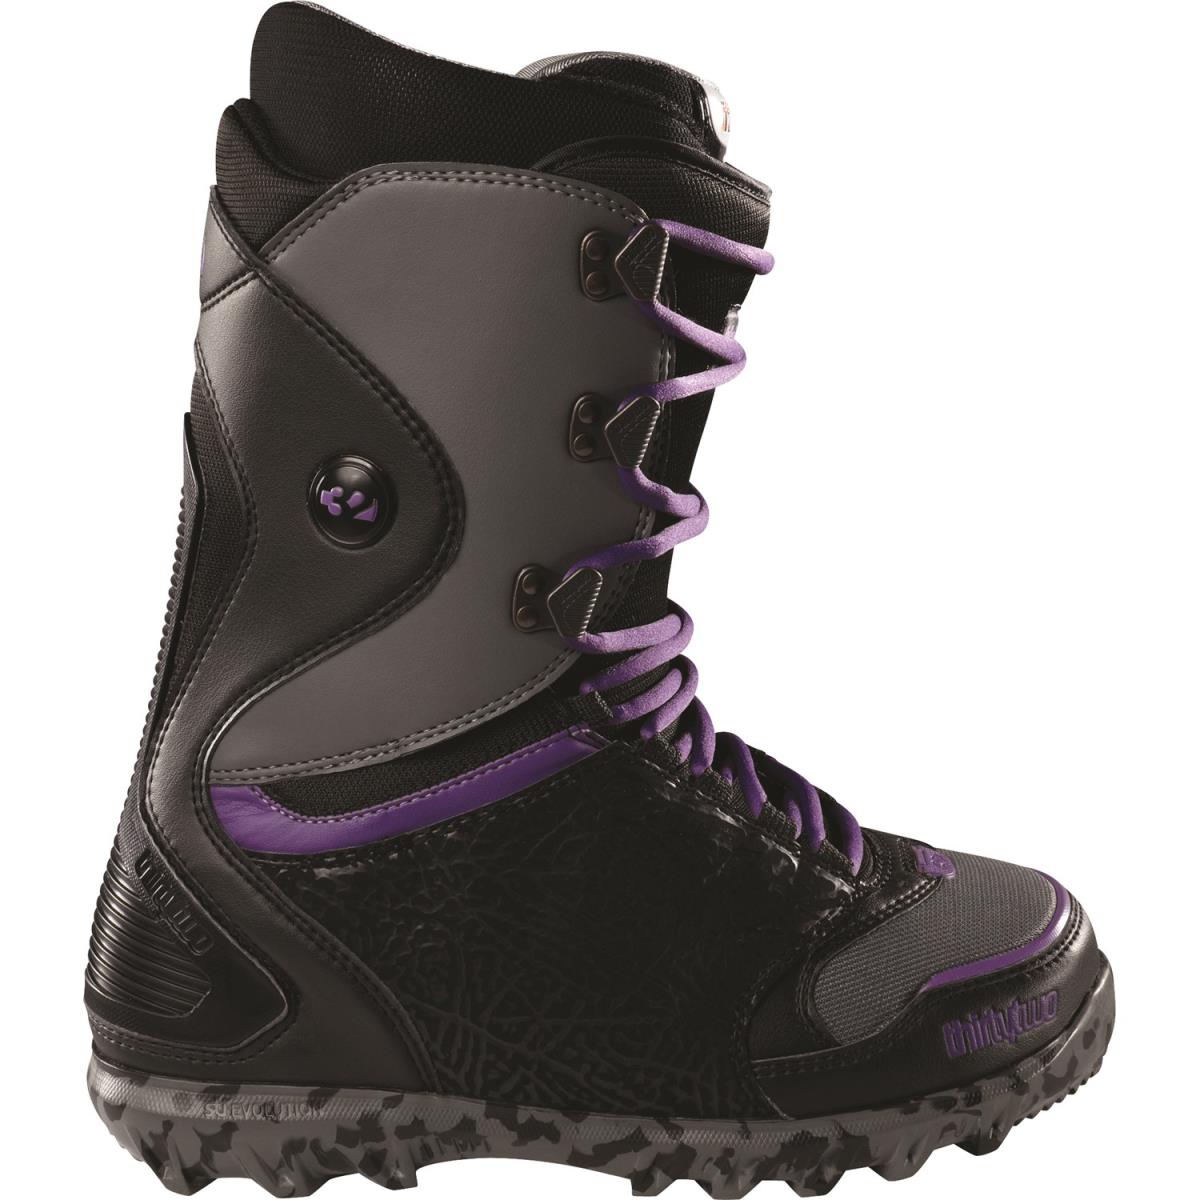 BOOTS DE SNOWBOARD NEUVE HOMME 32.THIRTY TWO LASHED